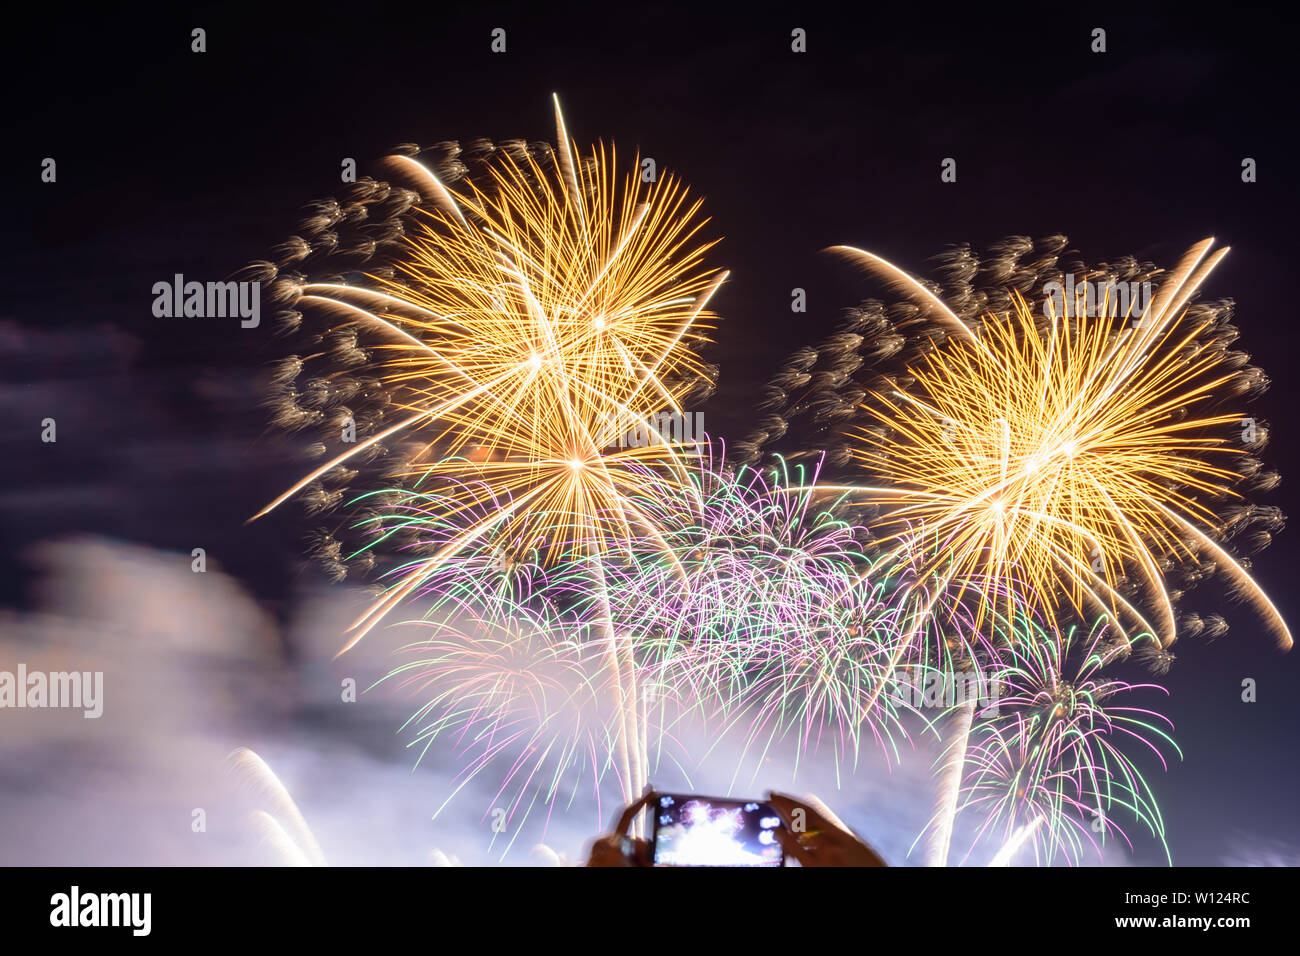 Colored firework background with free space for text. Colorful fireworks at night light up the sky with dazzling display. Stock Photo